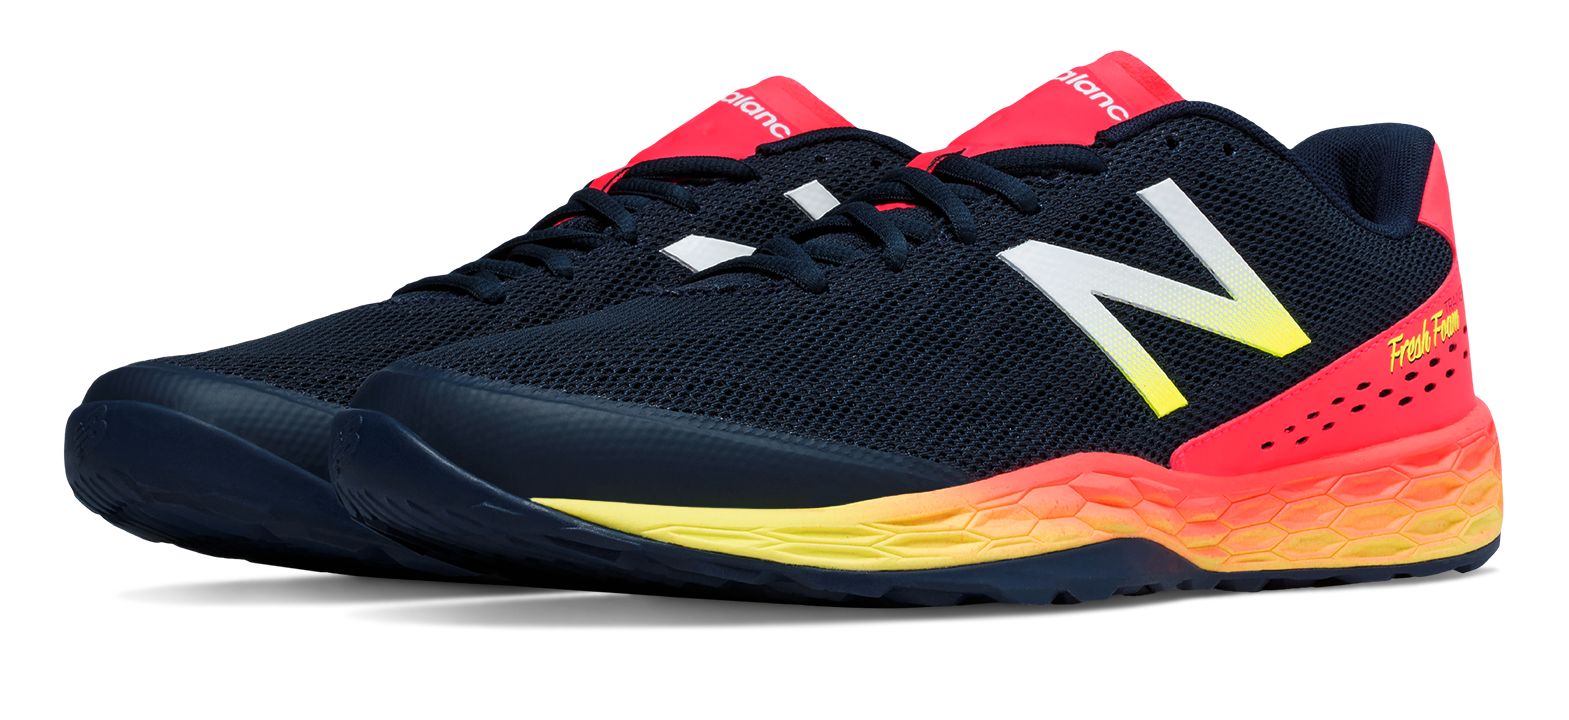 New Balance MX80-V3 on Sale - Discounts Up to 9% Off on MX80BC3 at Joe's New  Balance Outlet